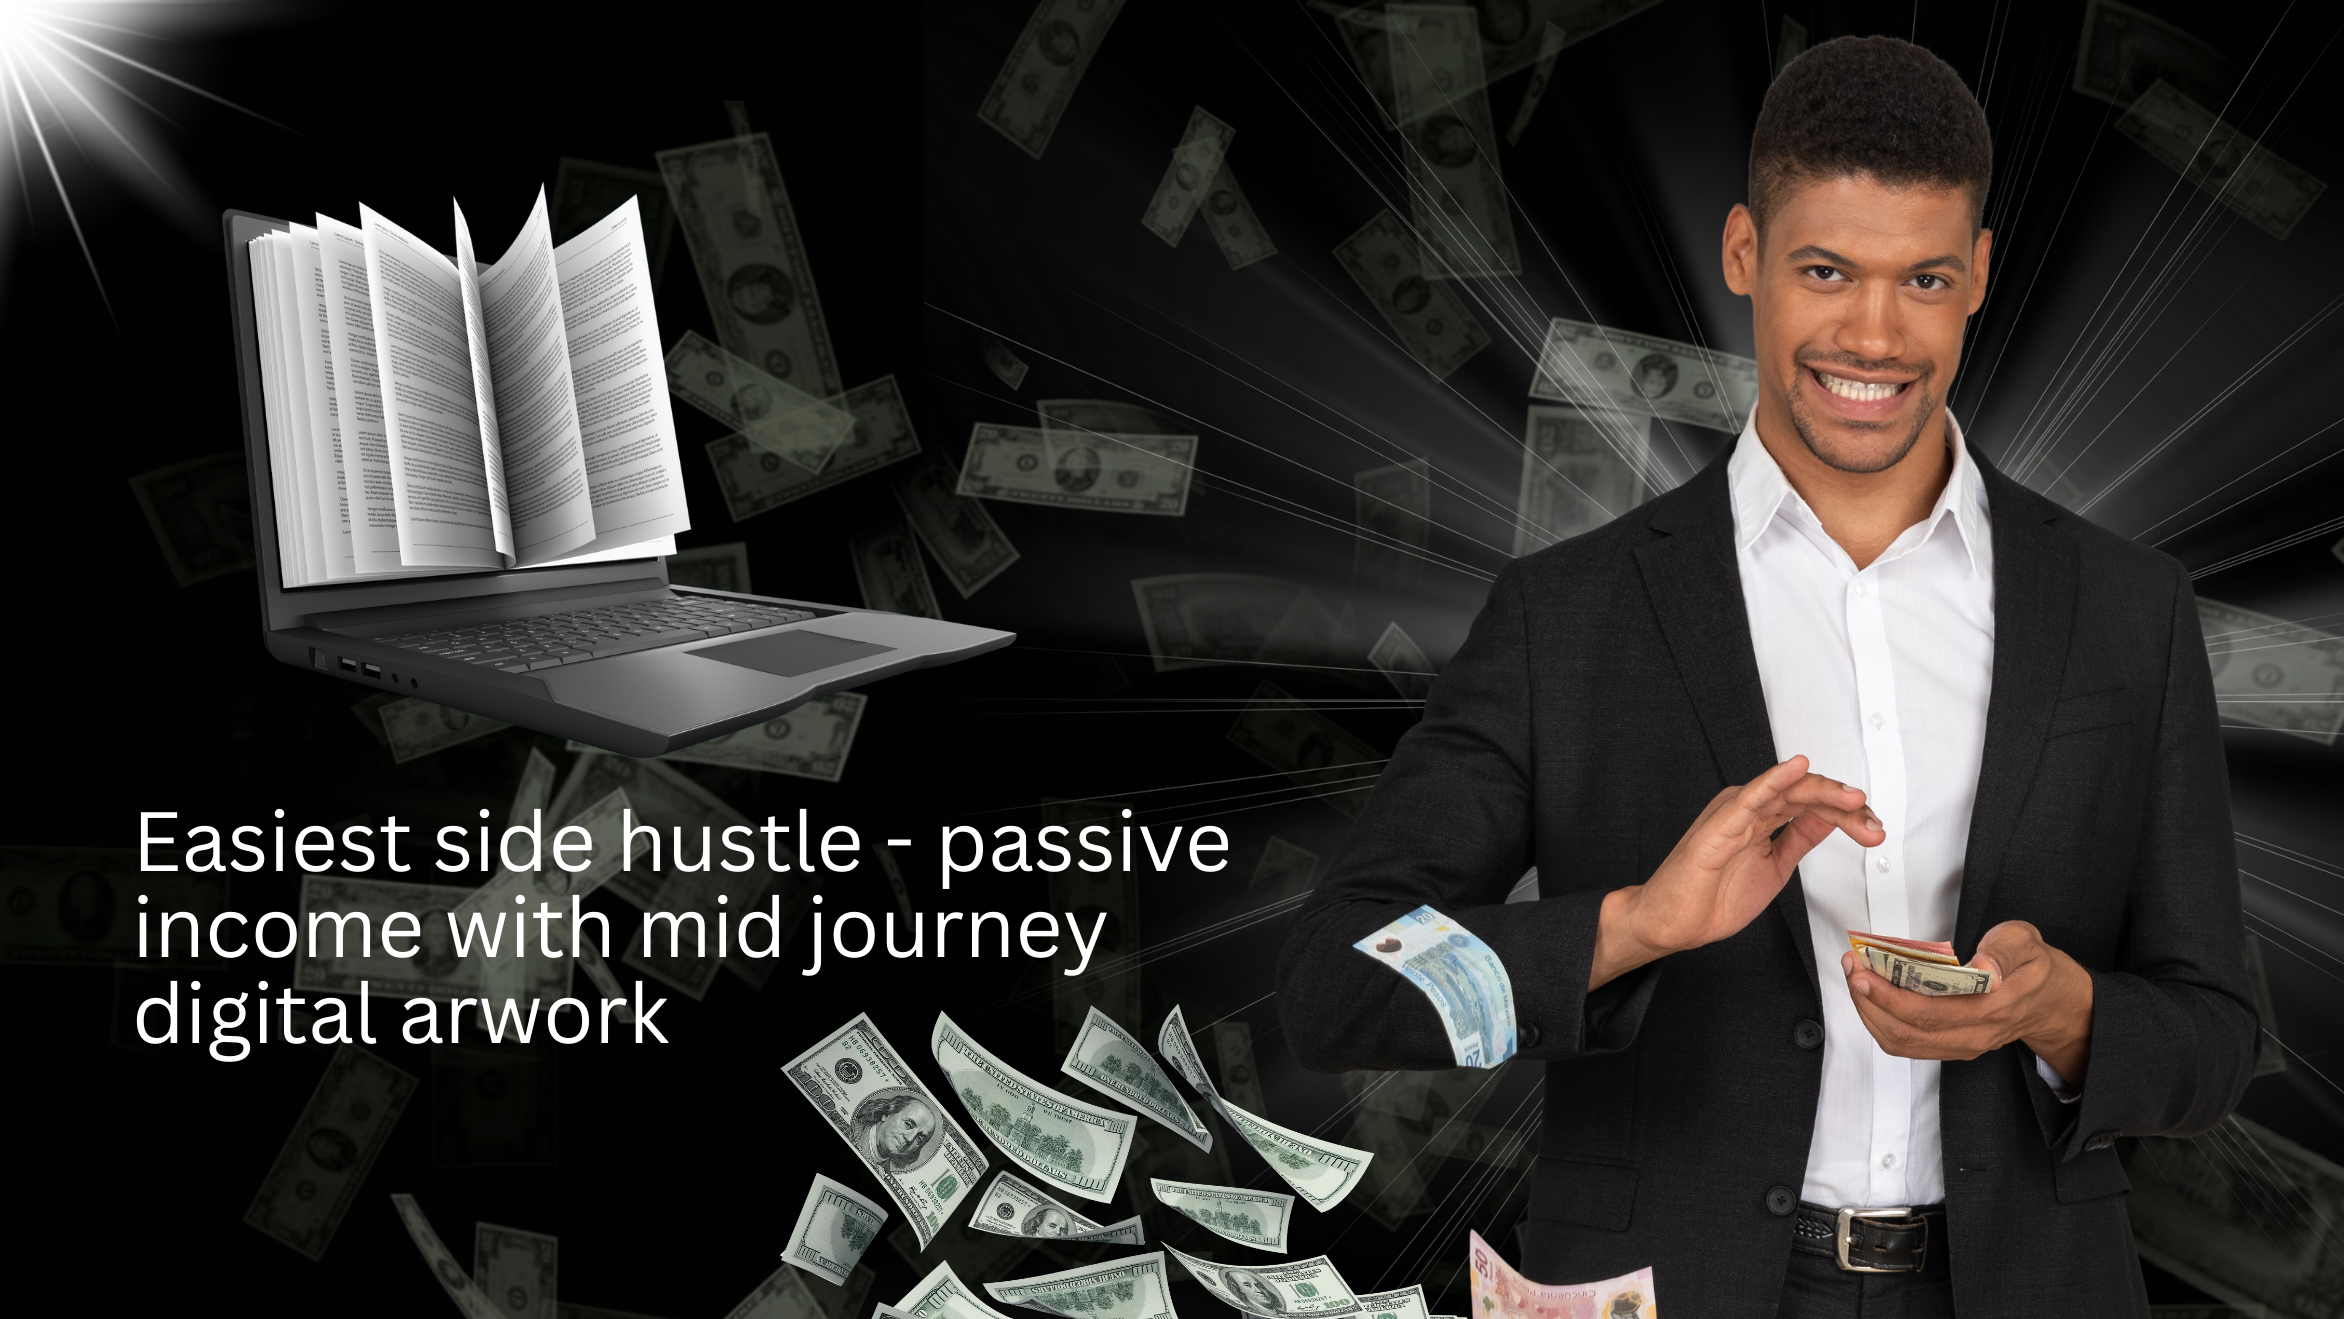 Easiest side hustle - passive income with mid journey digital artwork